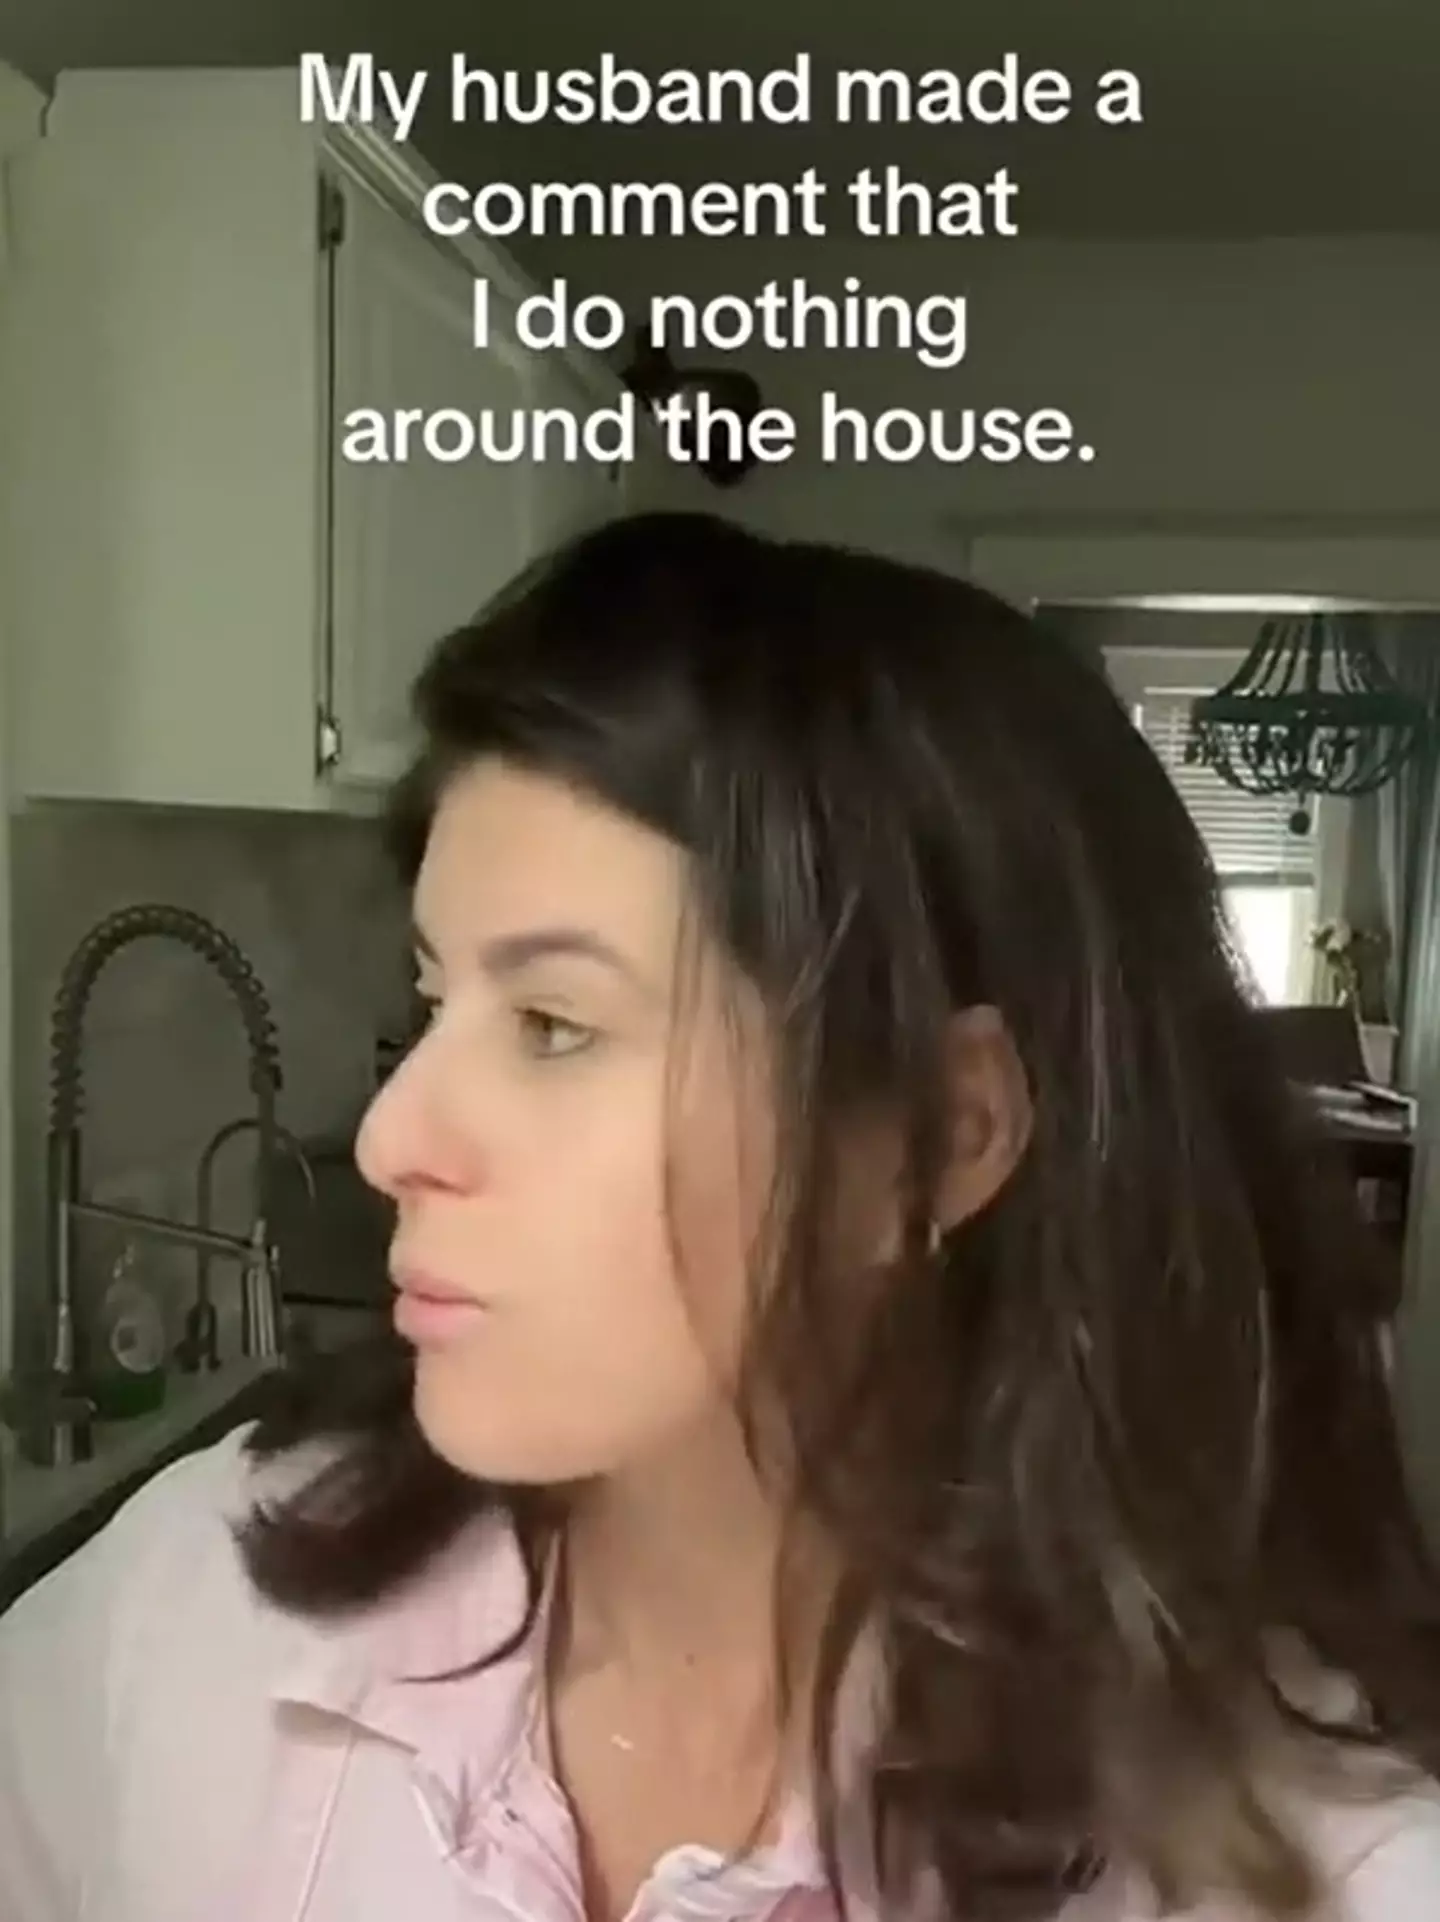 A woman's husband told her she didn't do anything around the house, so she didn't.